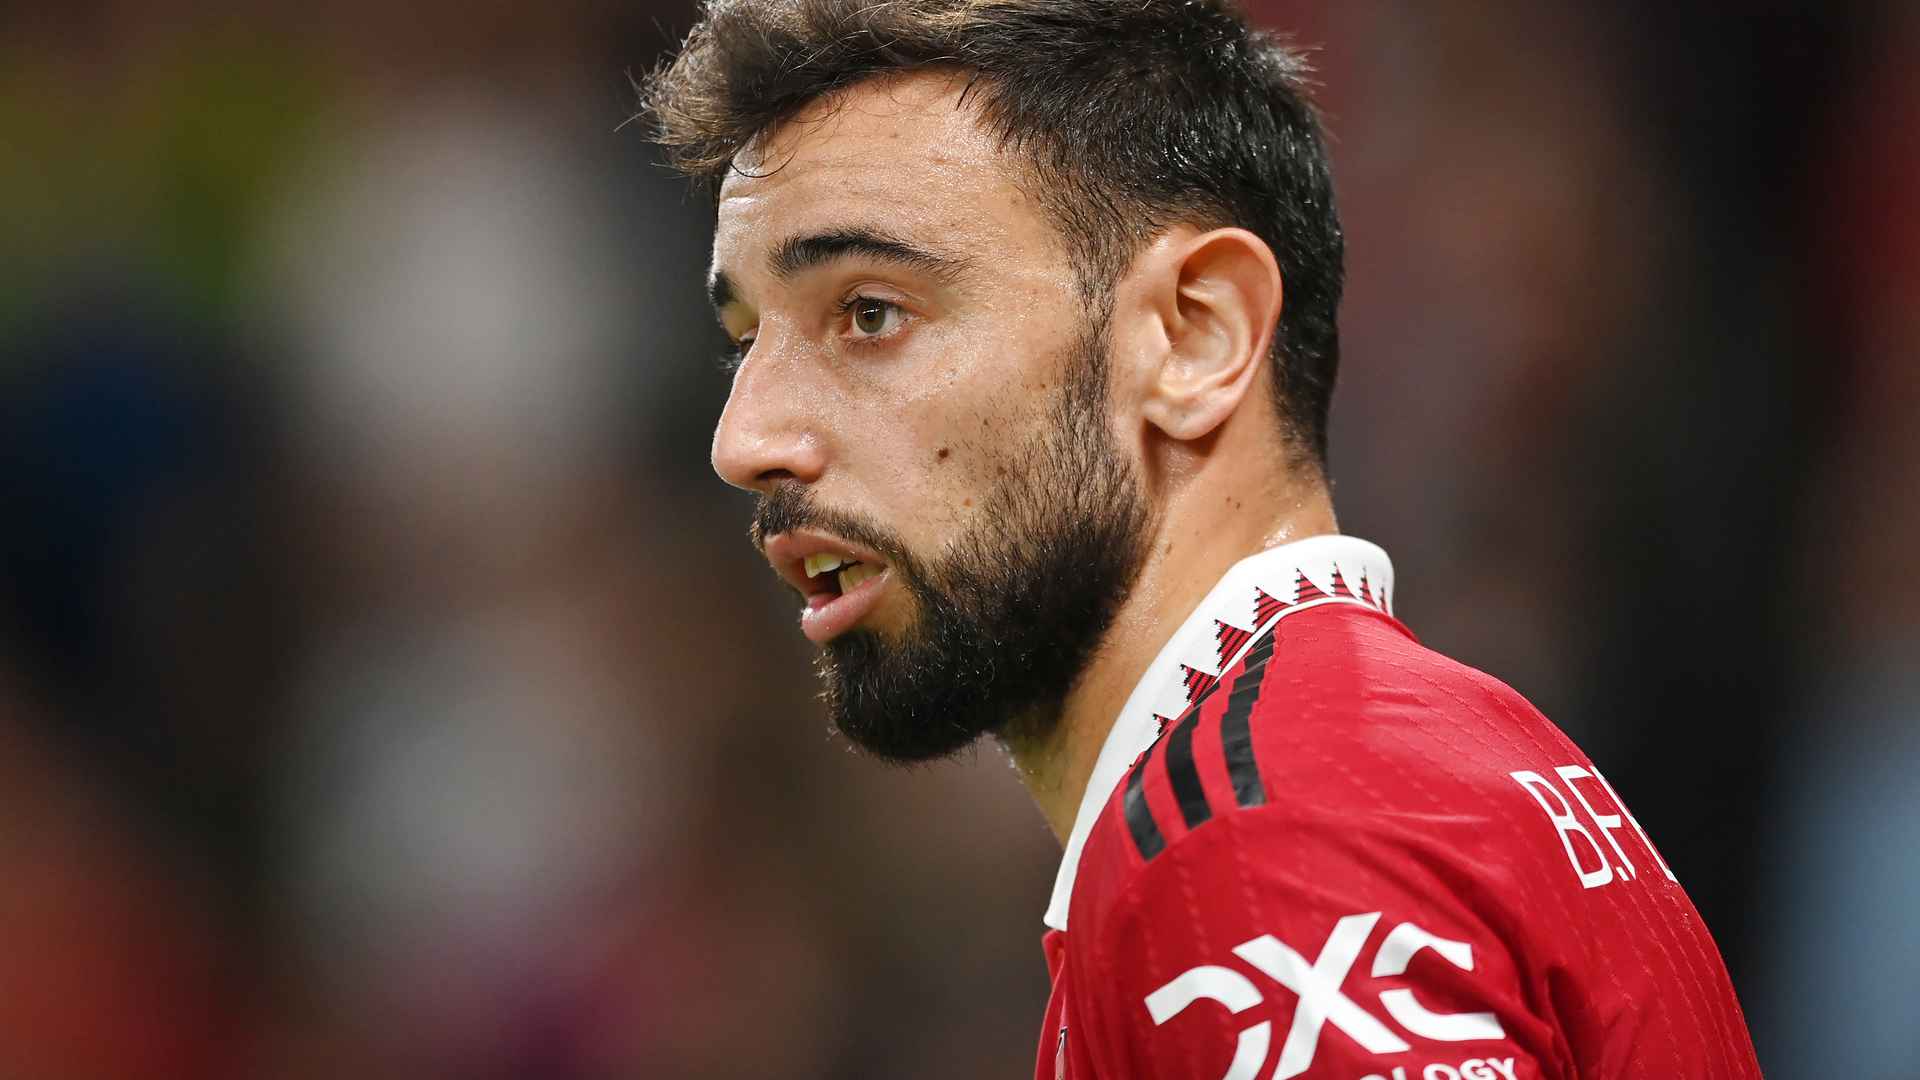 Exclusive Q and A with Bruno Fernandes before Omonia Nicosia v Man Utd ...